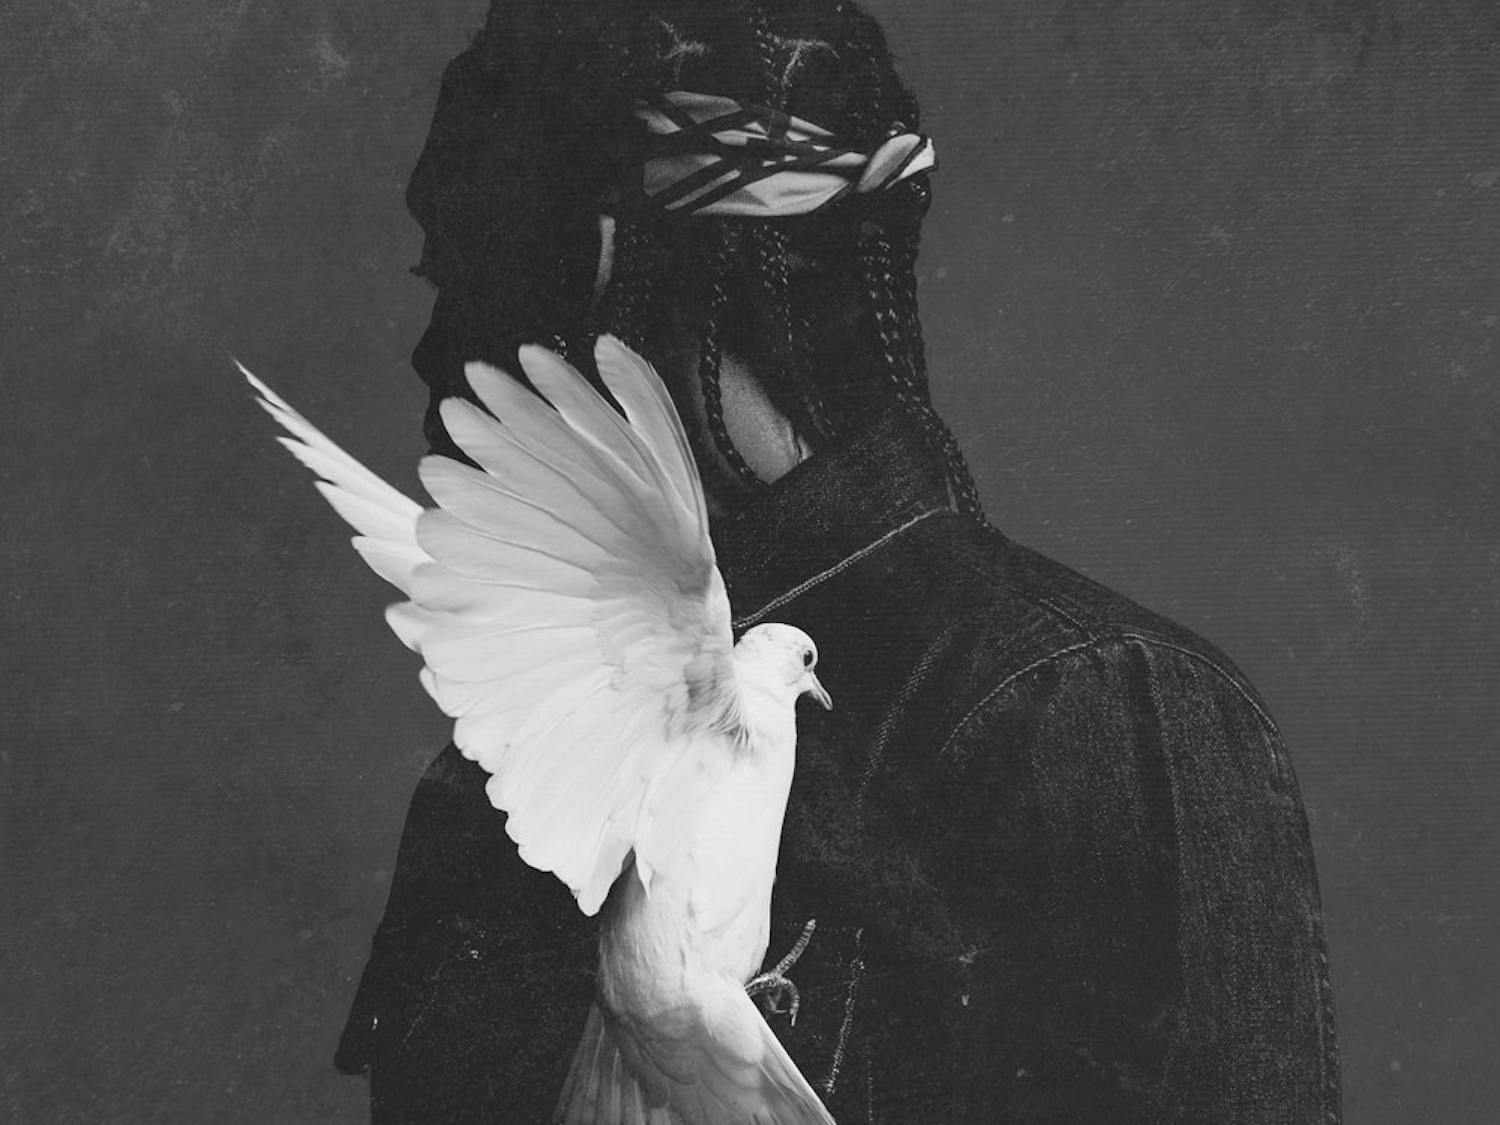 Pusha T’s newest album Darkest Before Dawn made a splash in the heavily saturated rap-market last month. His album is a precursor for his upcoming project King Push.